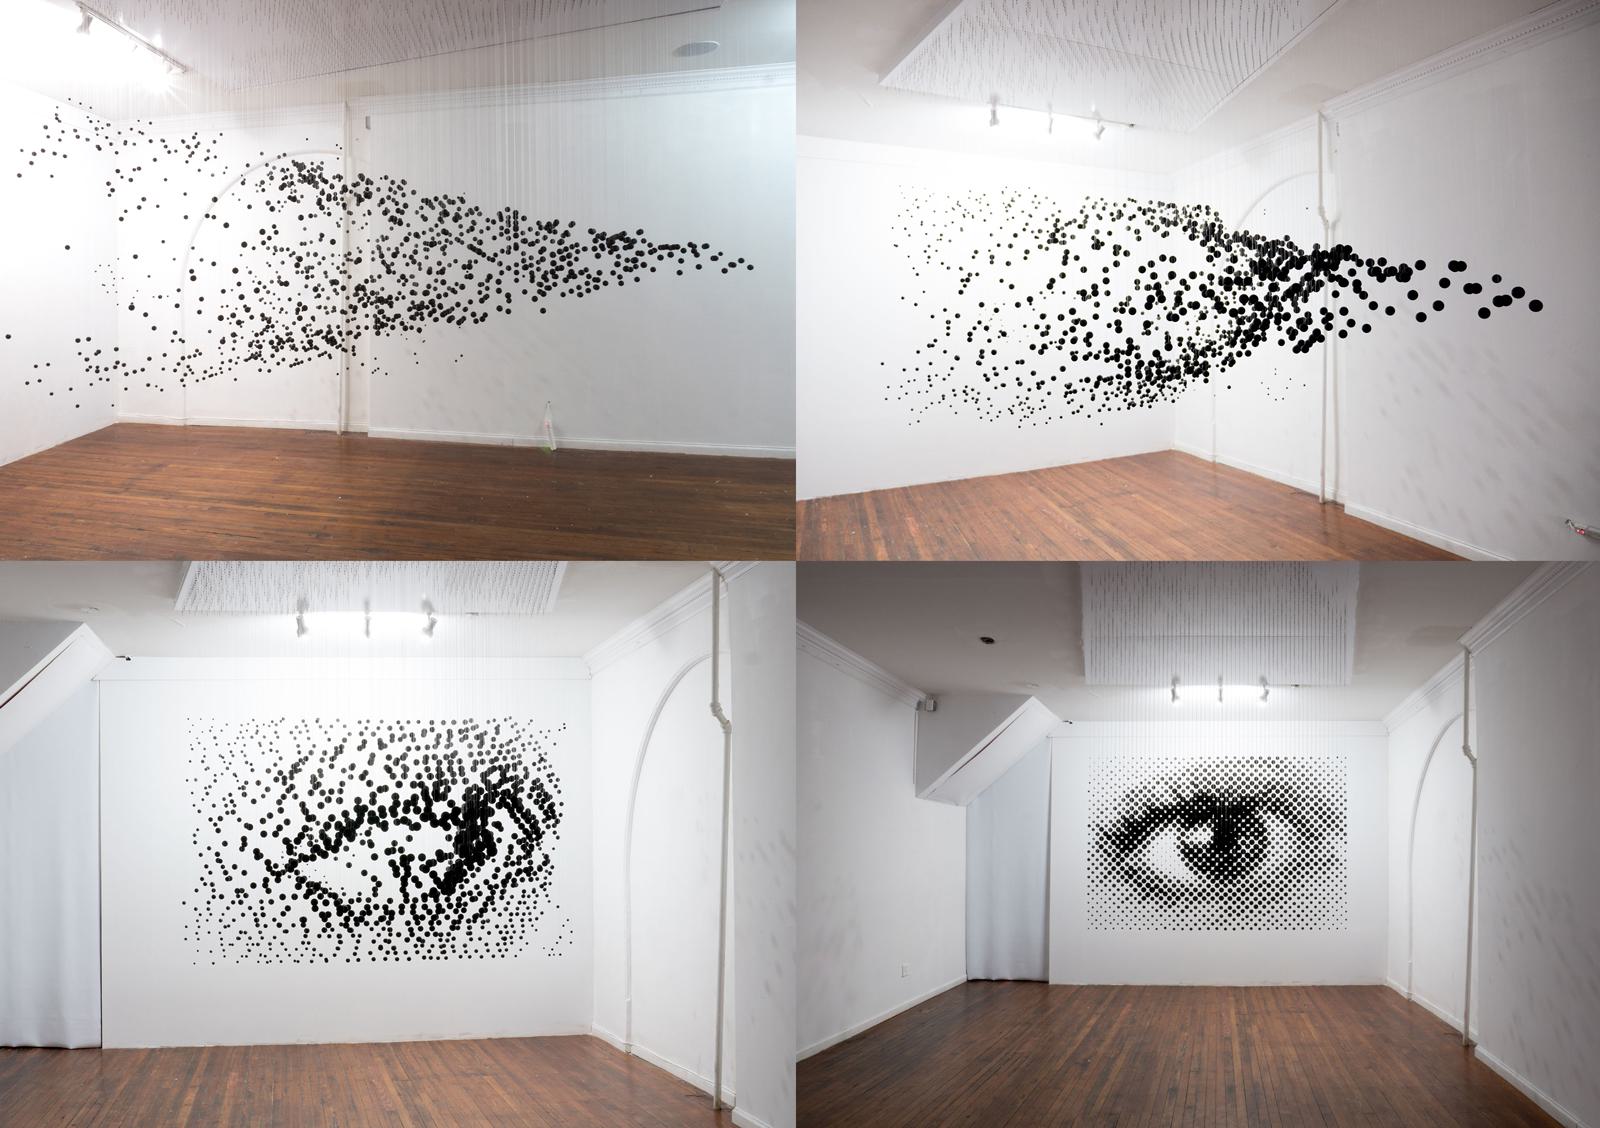 Image of Anamorphic Sculptures by Michael Murphy